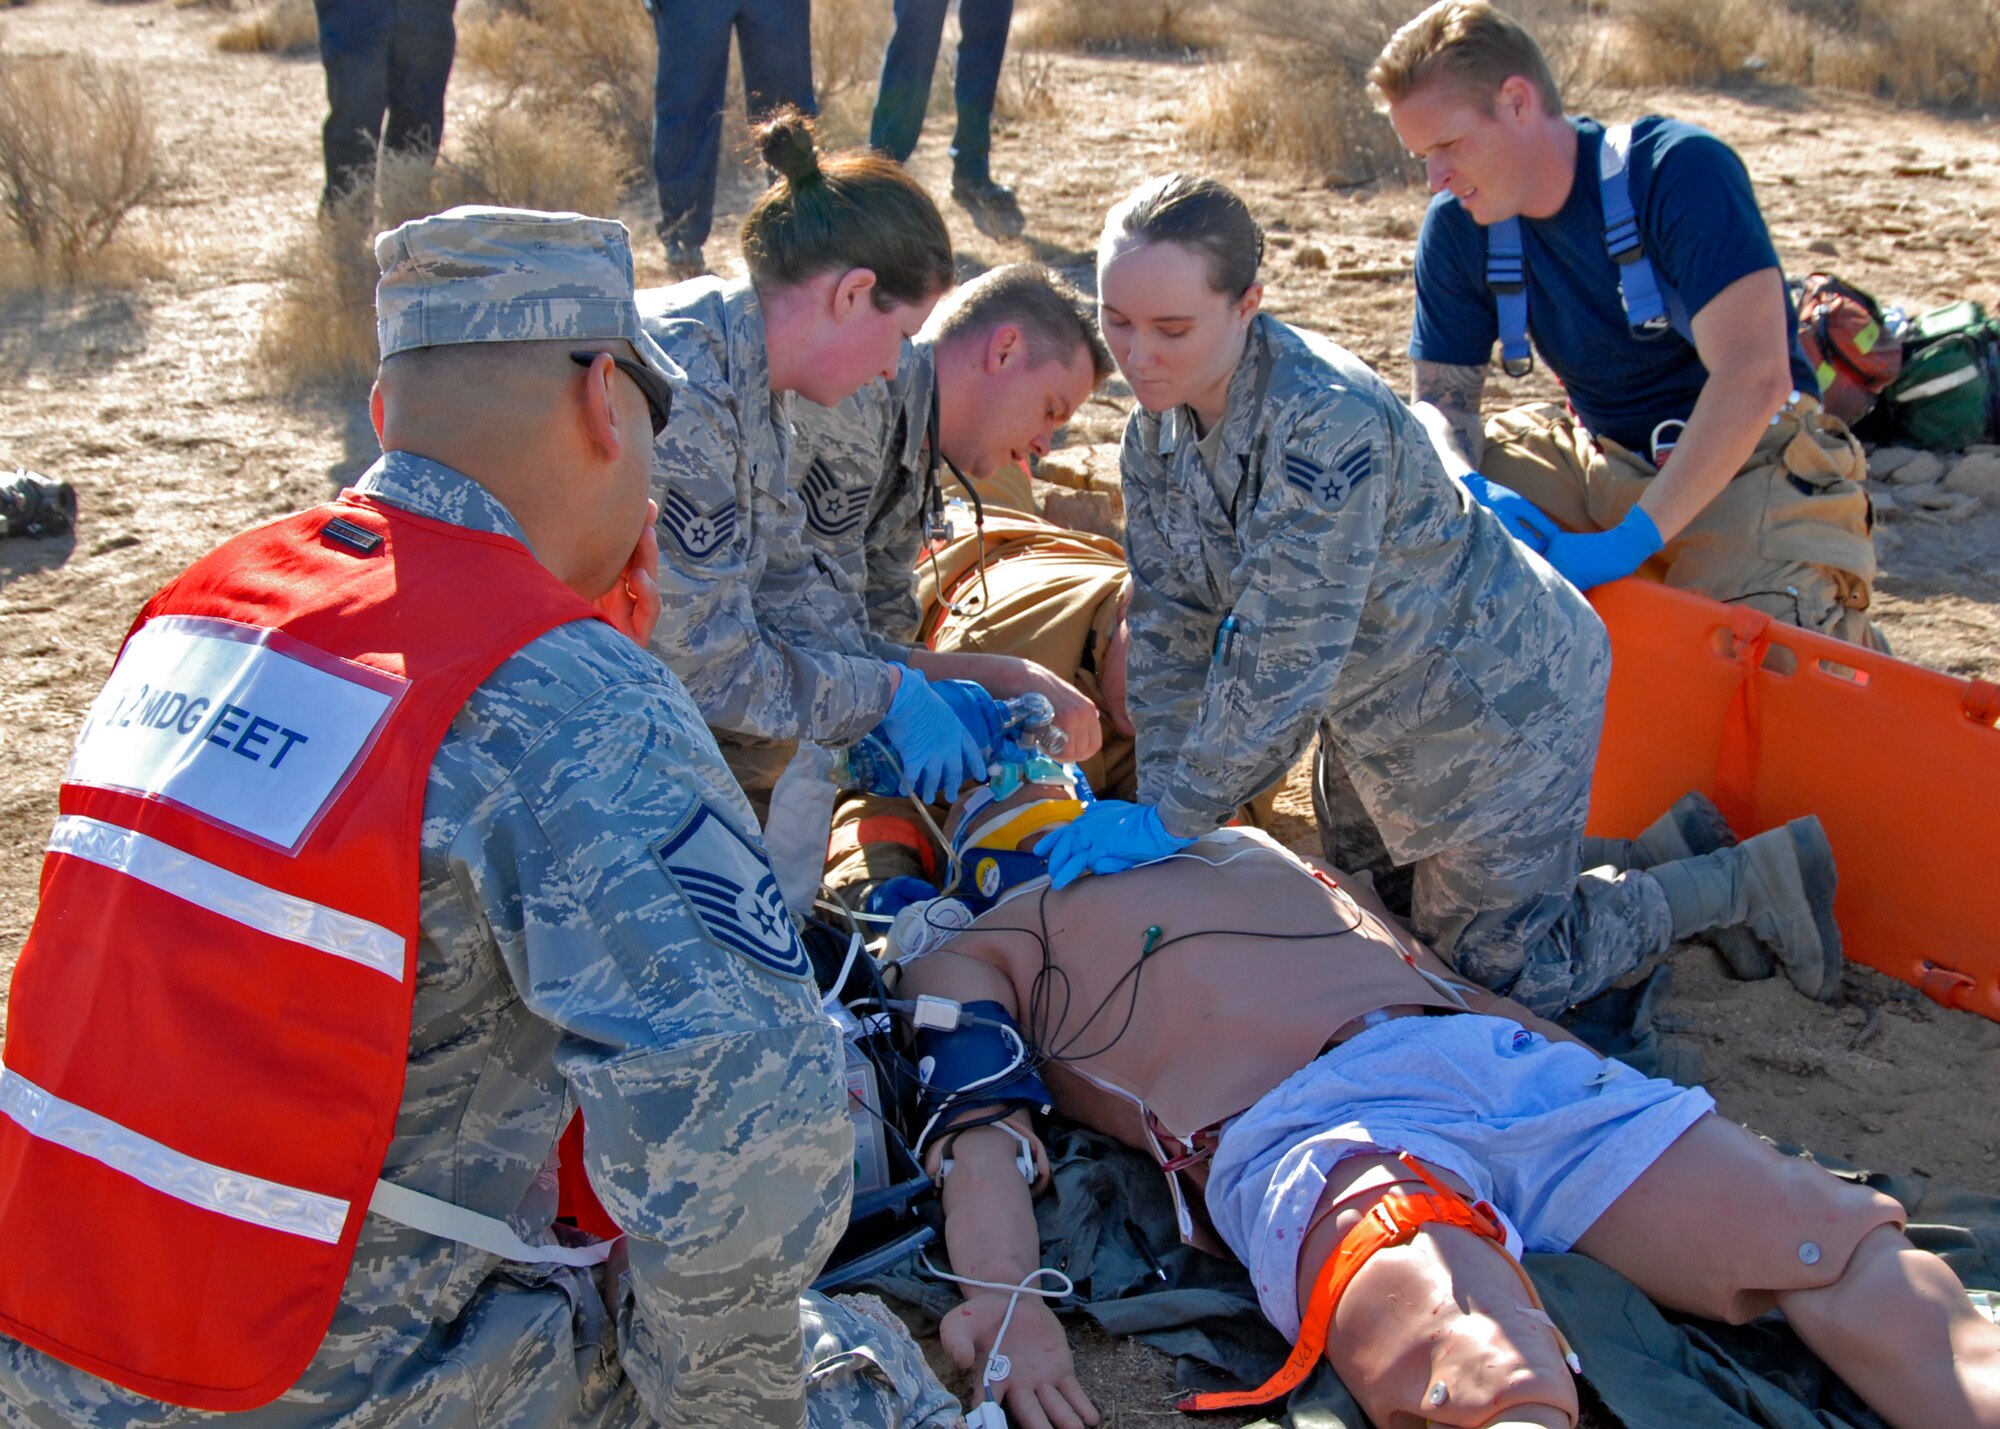 First responders demonstrate their emergency response capabilities during the Desert Wind 13-01 exercise, which tested Edwards' response to a major aircraft incident Oct. 1. Medical personnel trained for the first time using a METIman mannequin, adding a new dimension of realism to the exercise, better preparing them for real-world scenerios. (U.S. Air Force Photo by Laura Mowry)